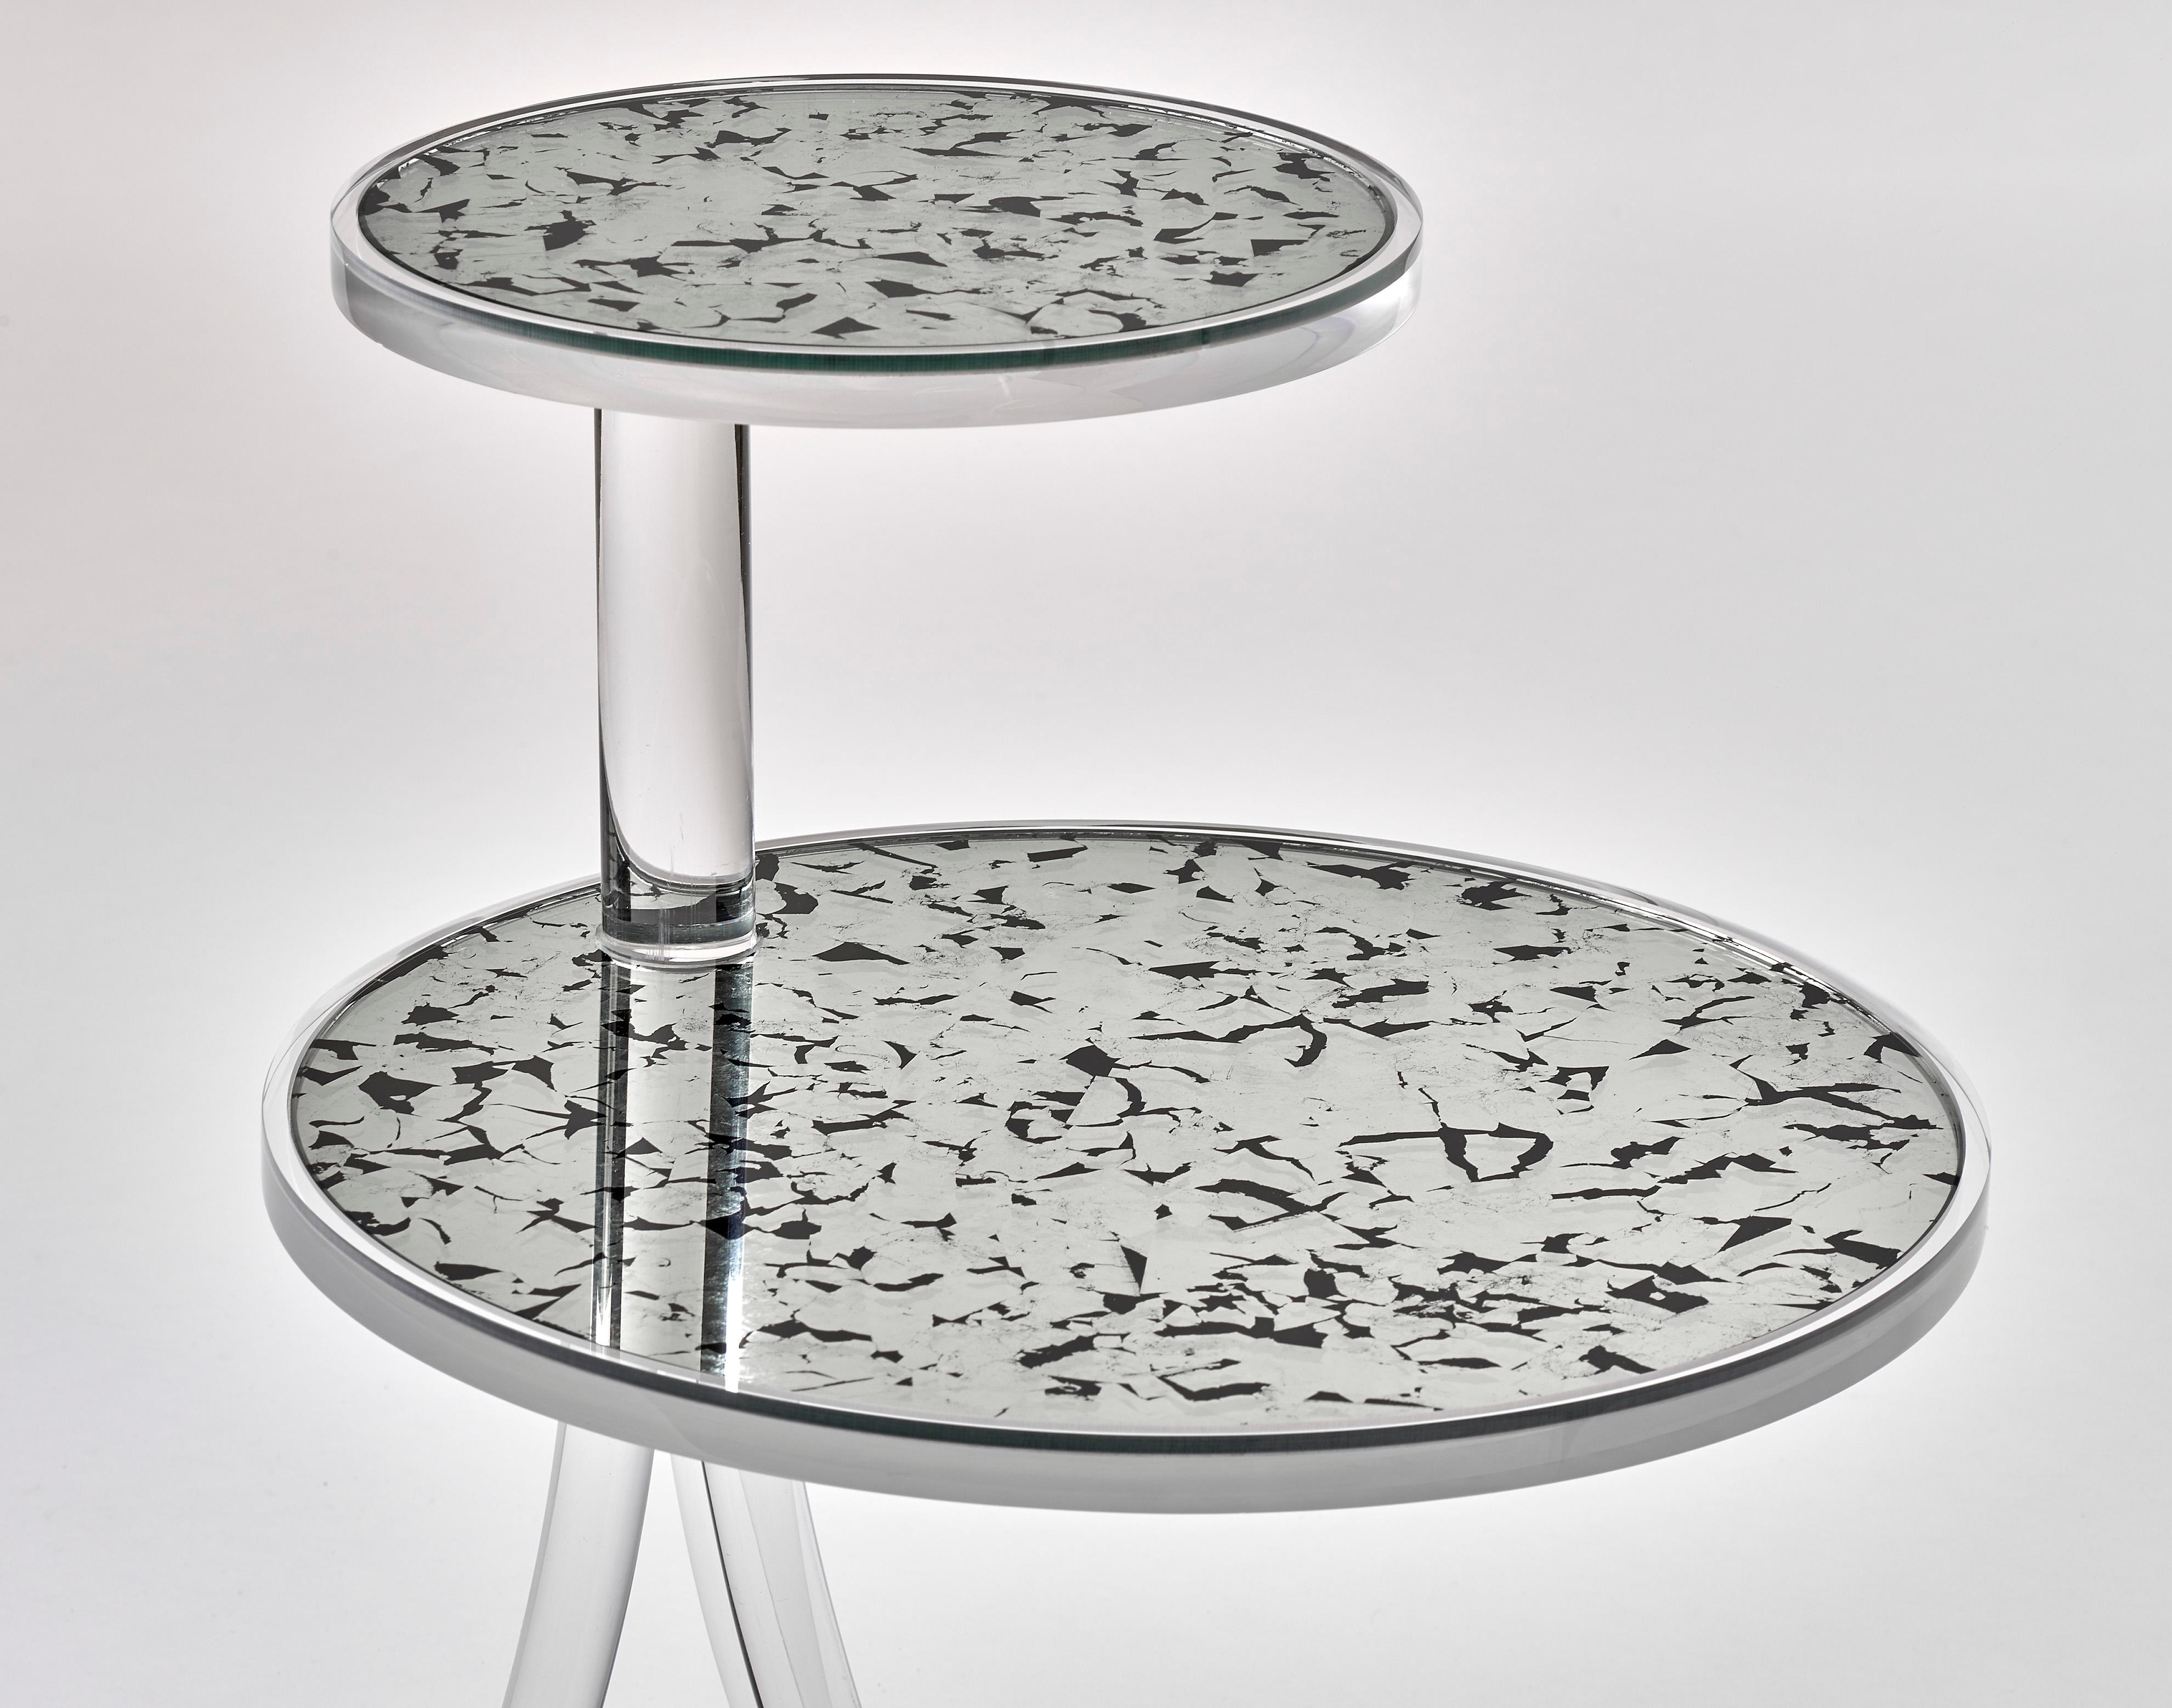 Archer acrylic table with antique glass mirror inserts.
Two-tiered acrylics table
Measures: Top table 10